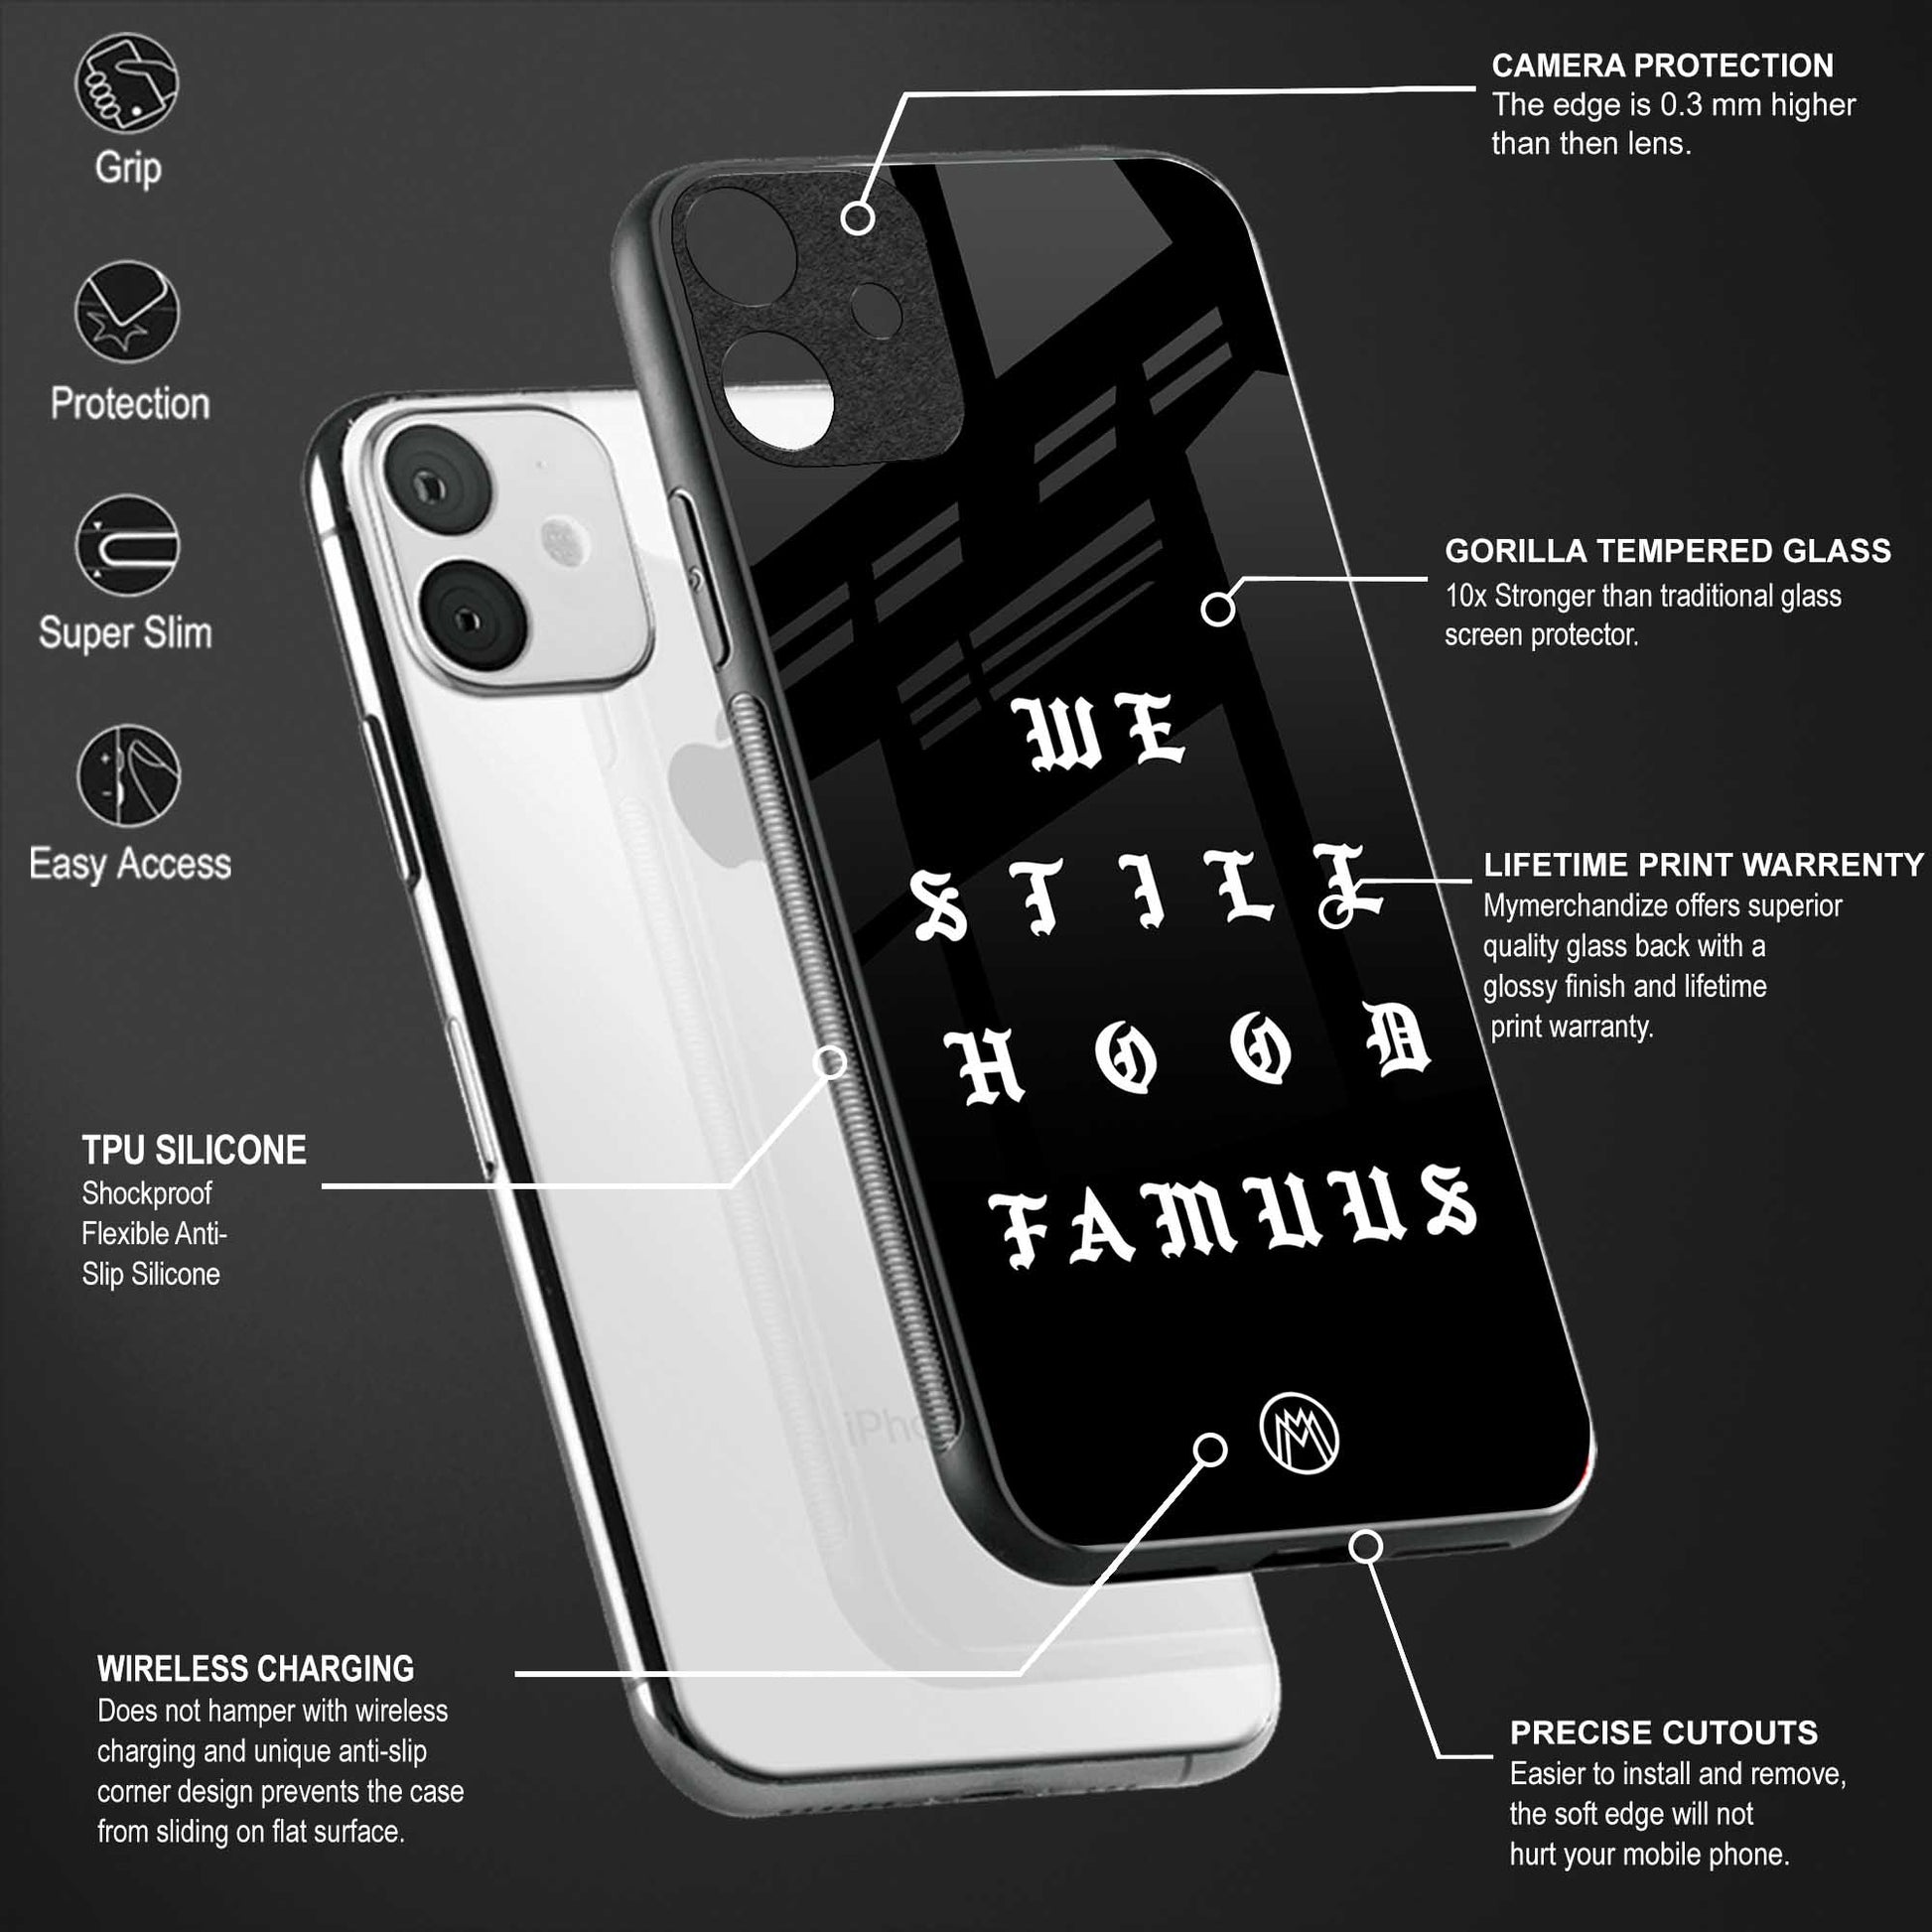 hood famous phone cover for samsung galaxy f41